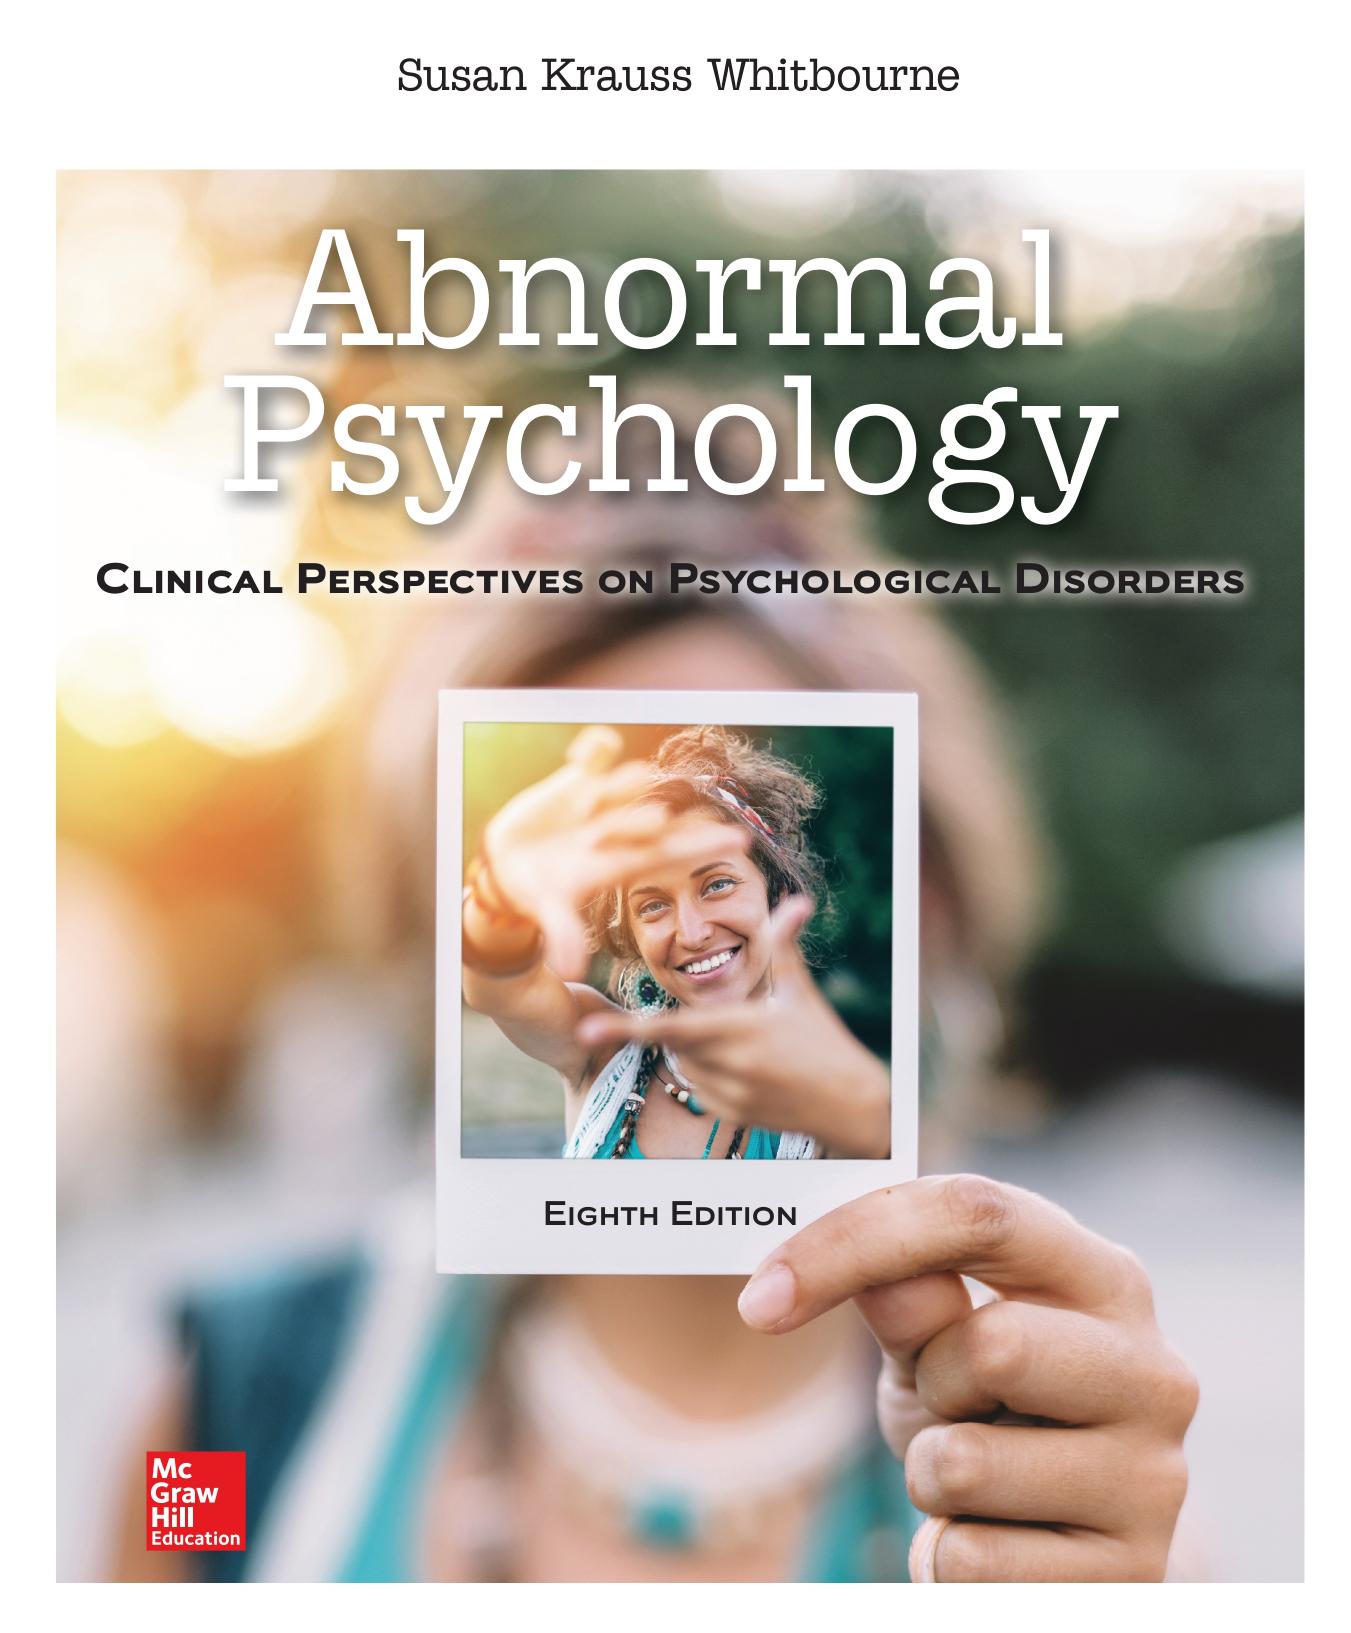 AAbnormal Psychology: Clinical Perspectives on Psychological Disorders 8th Edition by  SUSAN KRAUSS WHITBOURNE